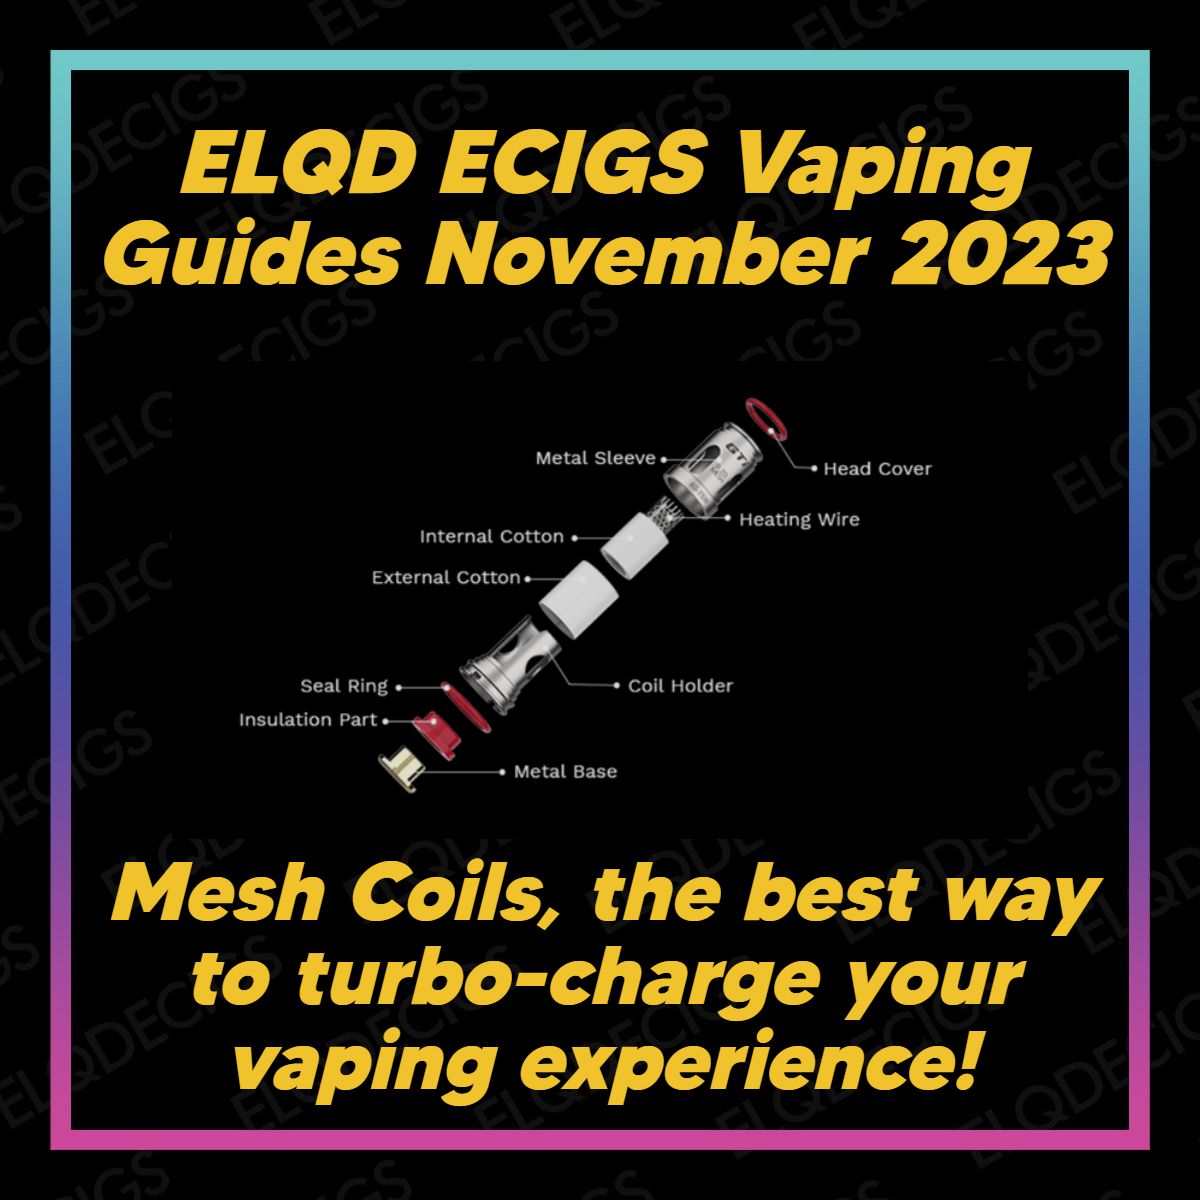 Mesh Coils, The Best Way To Turbo Charge Your Vaping Experience!